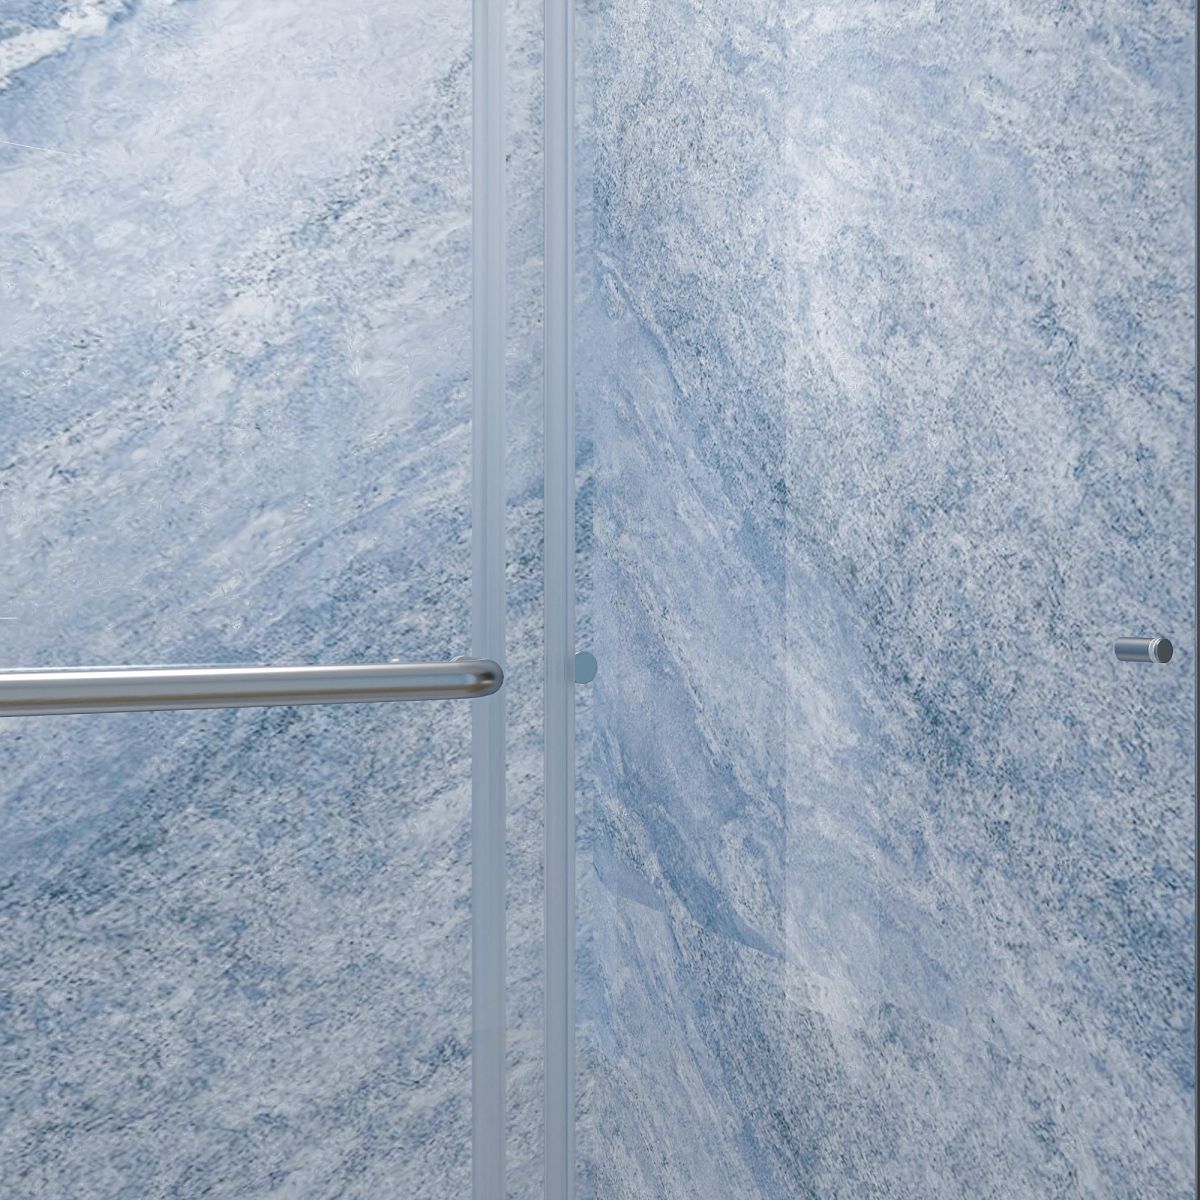 Glide 44-48" Wide x 70" Sliding Glass Shower Doors Frame in Nickel,Clear Tempered Glass